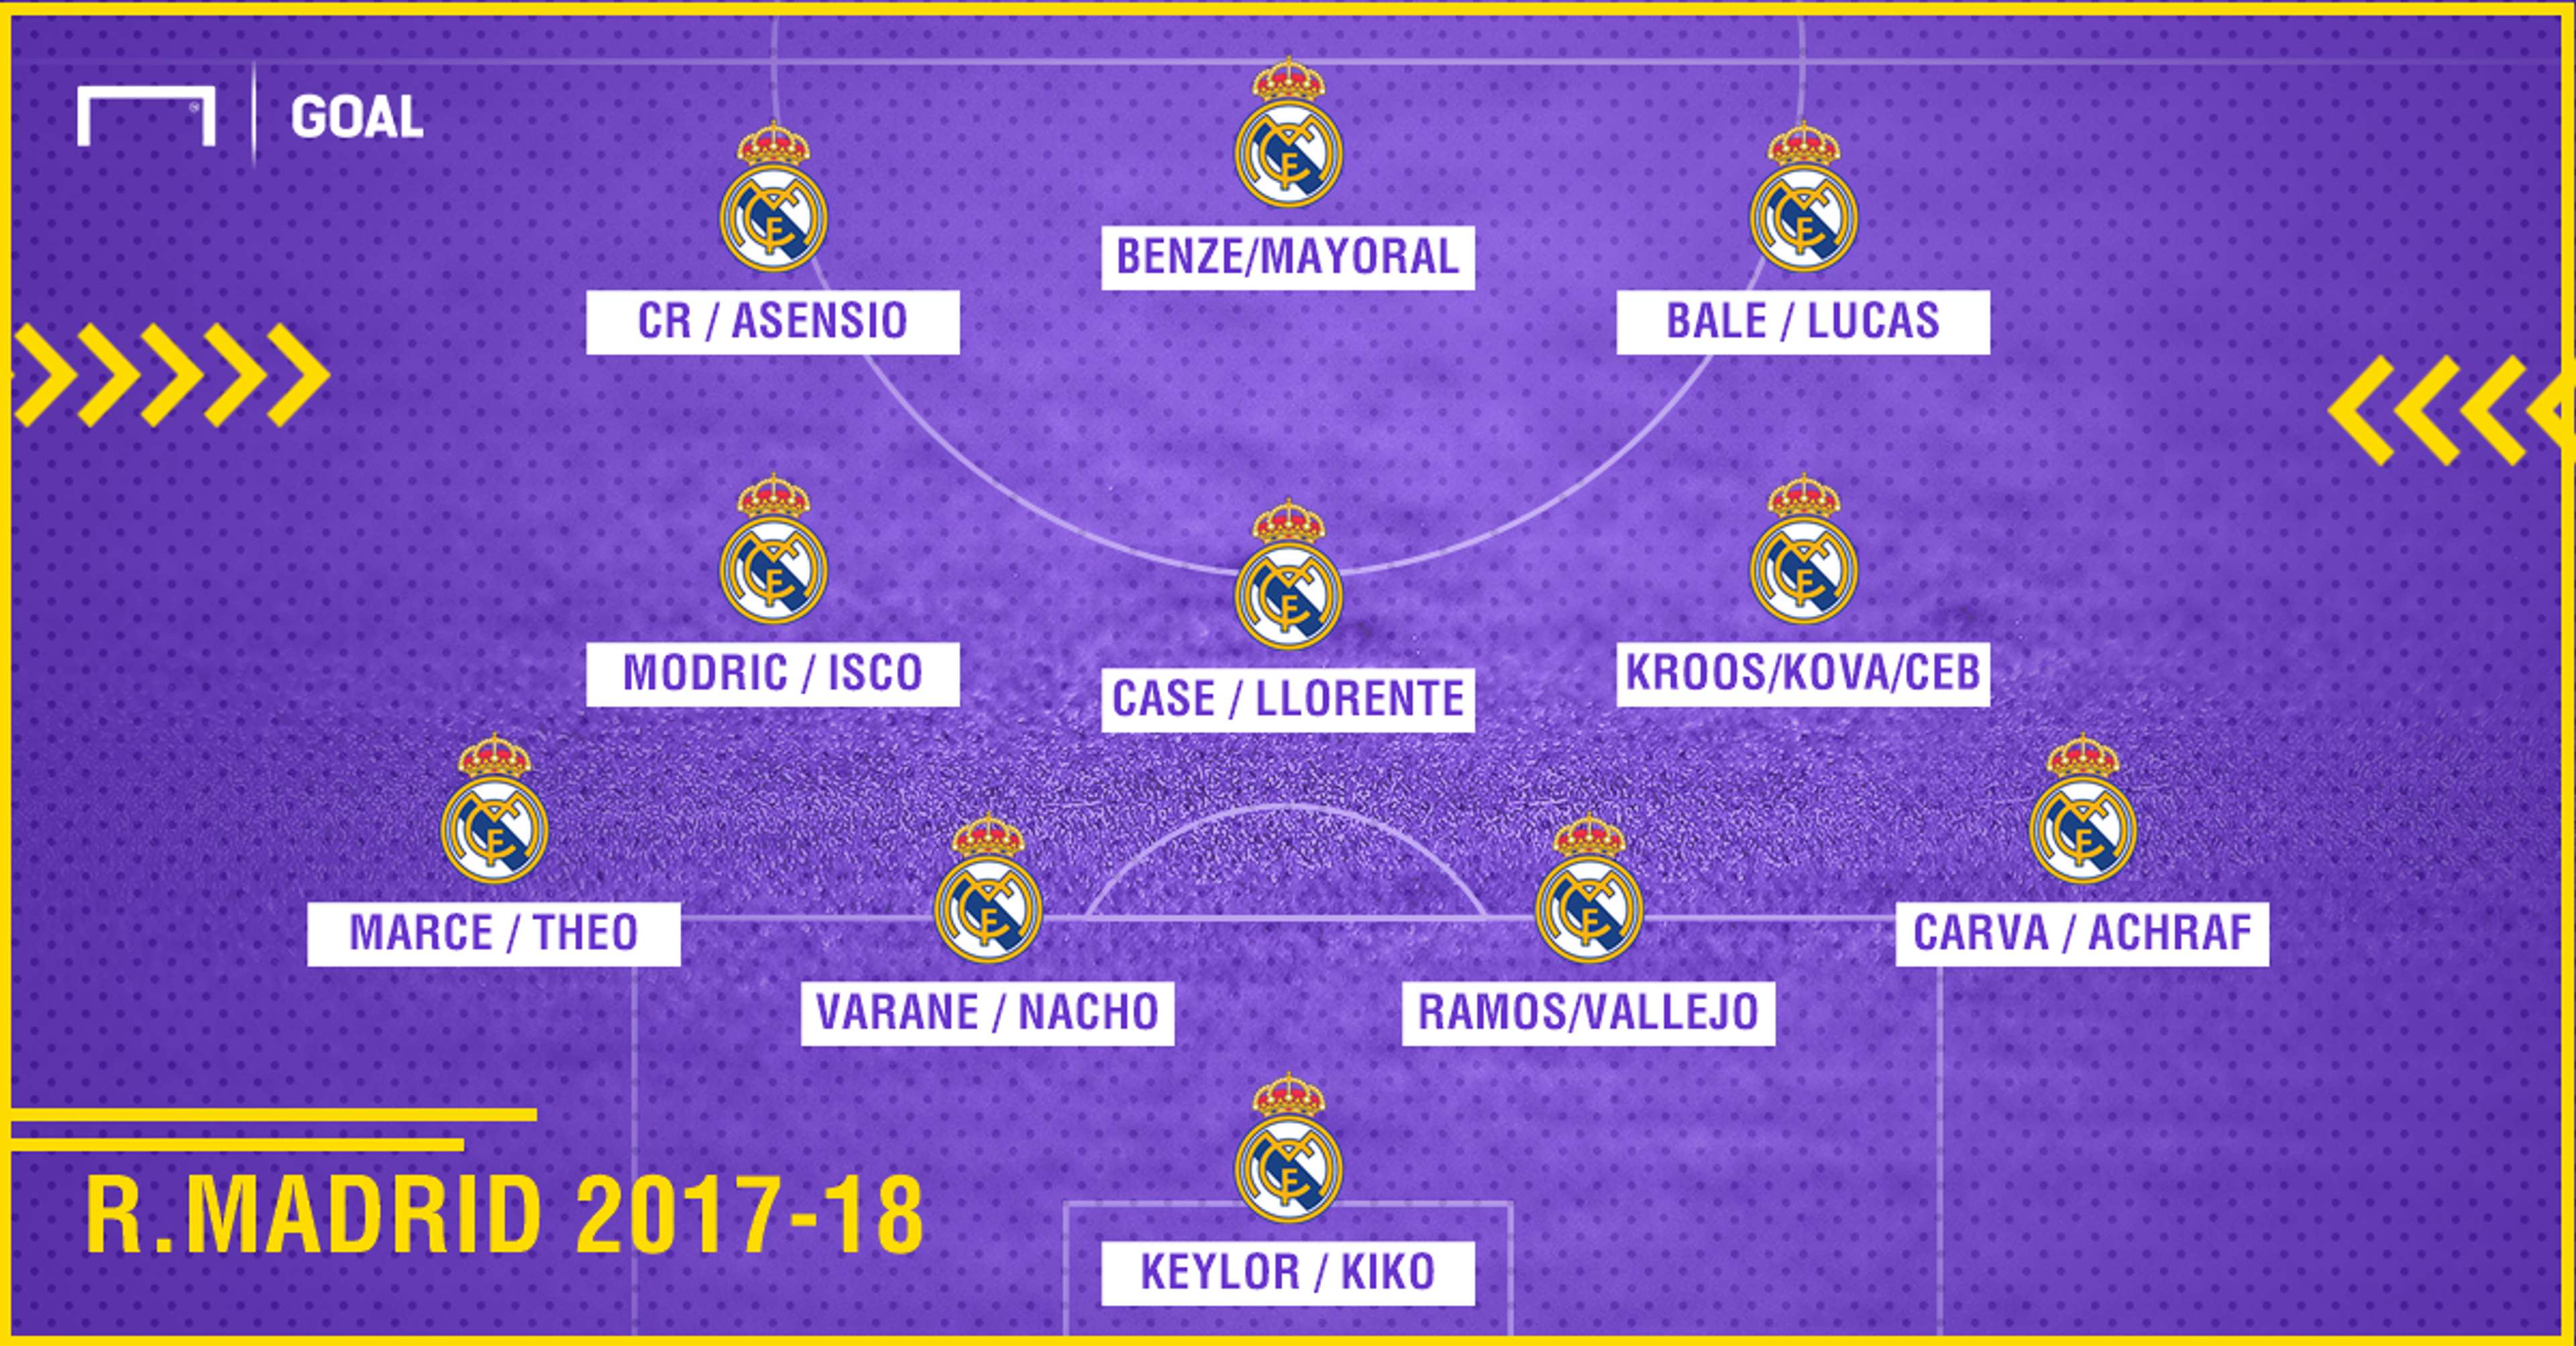 Real Madrid squad for the 2007-08 season